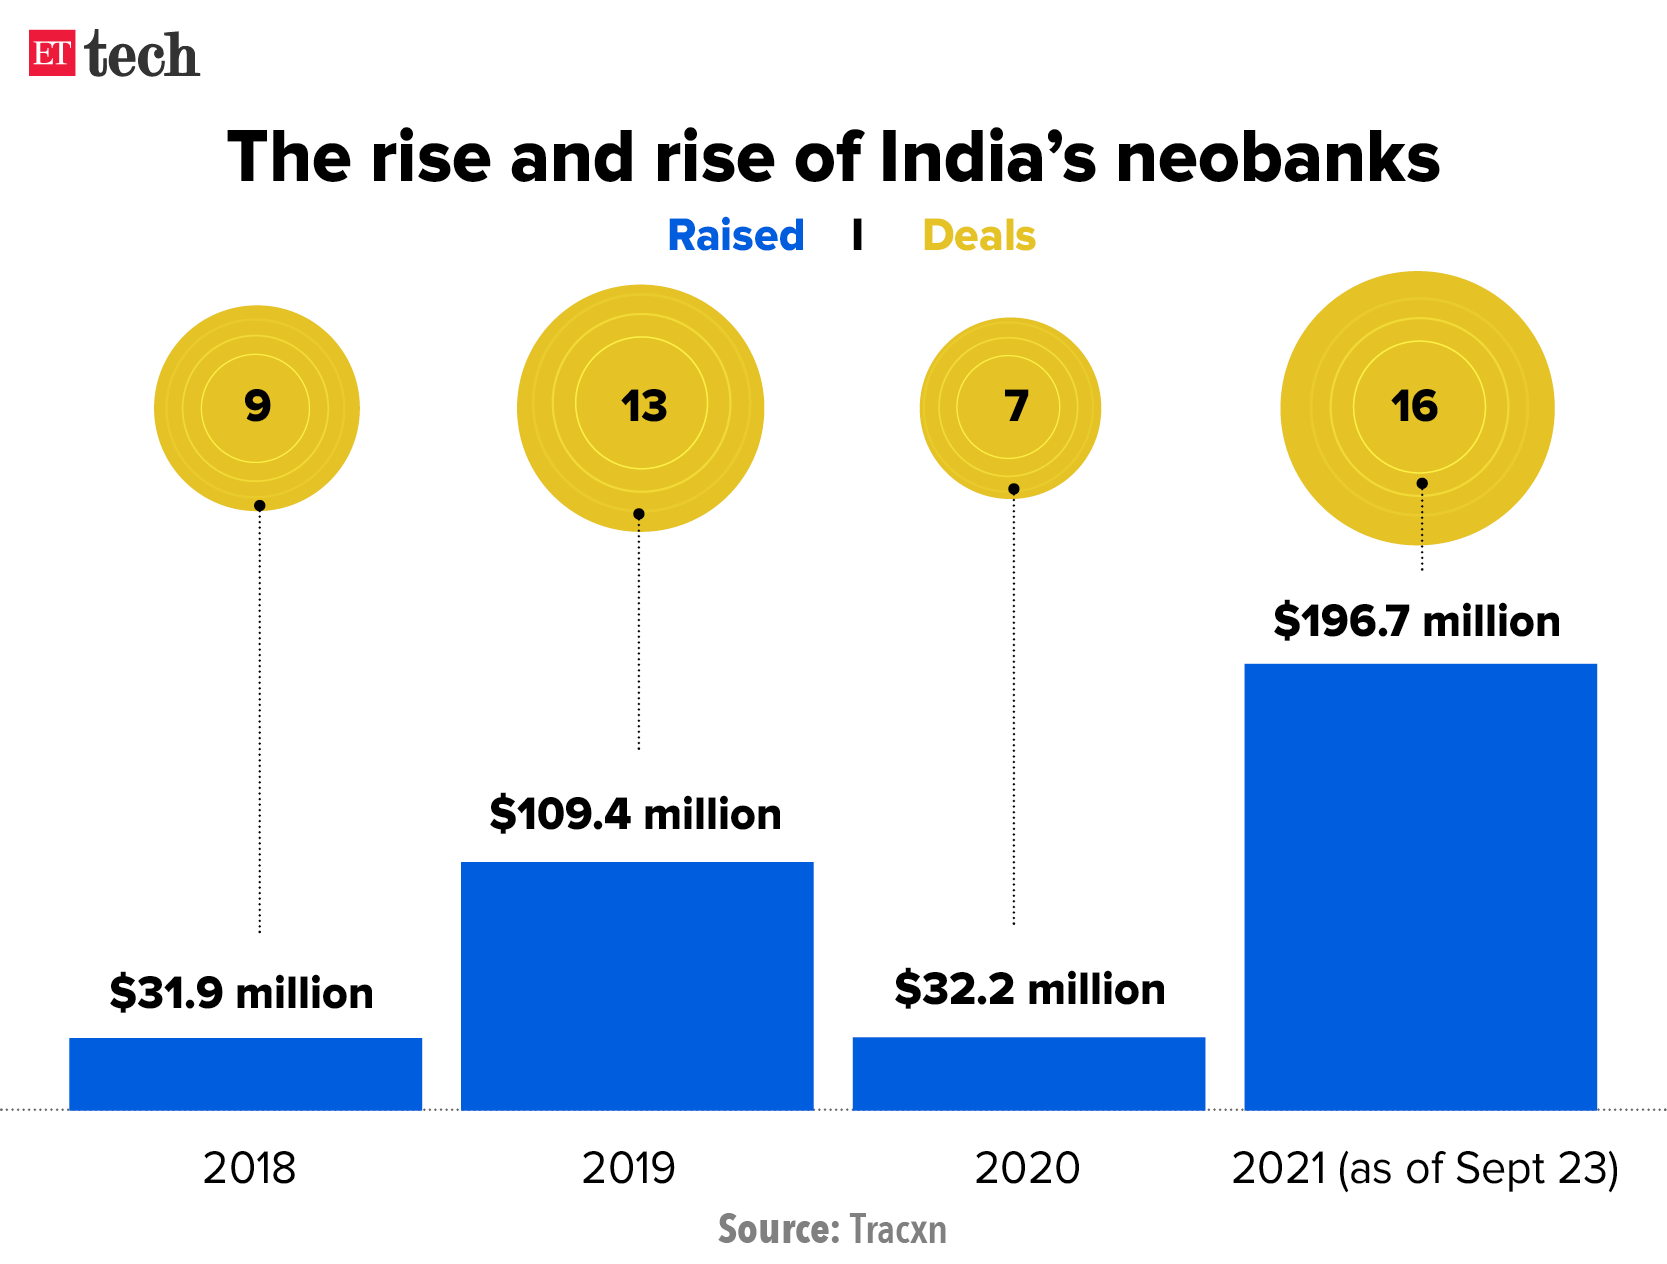 The rise and rise of Indias neobanks